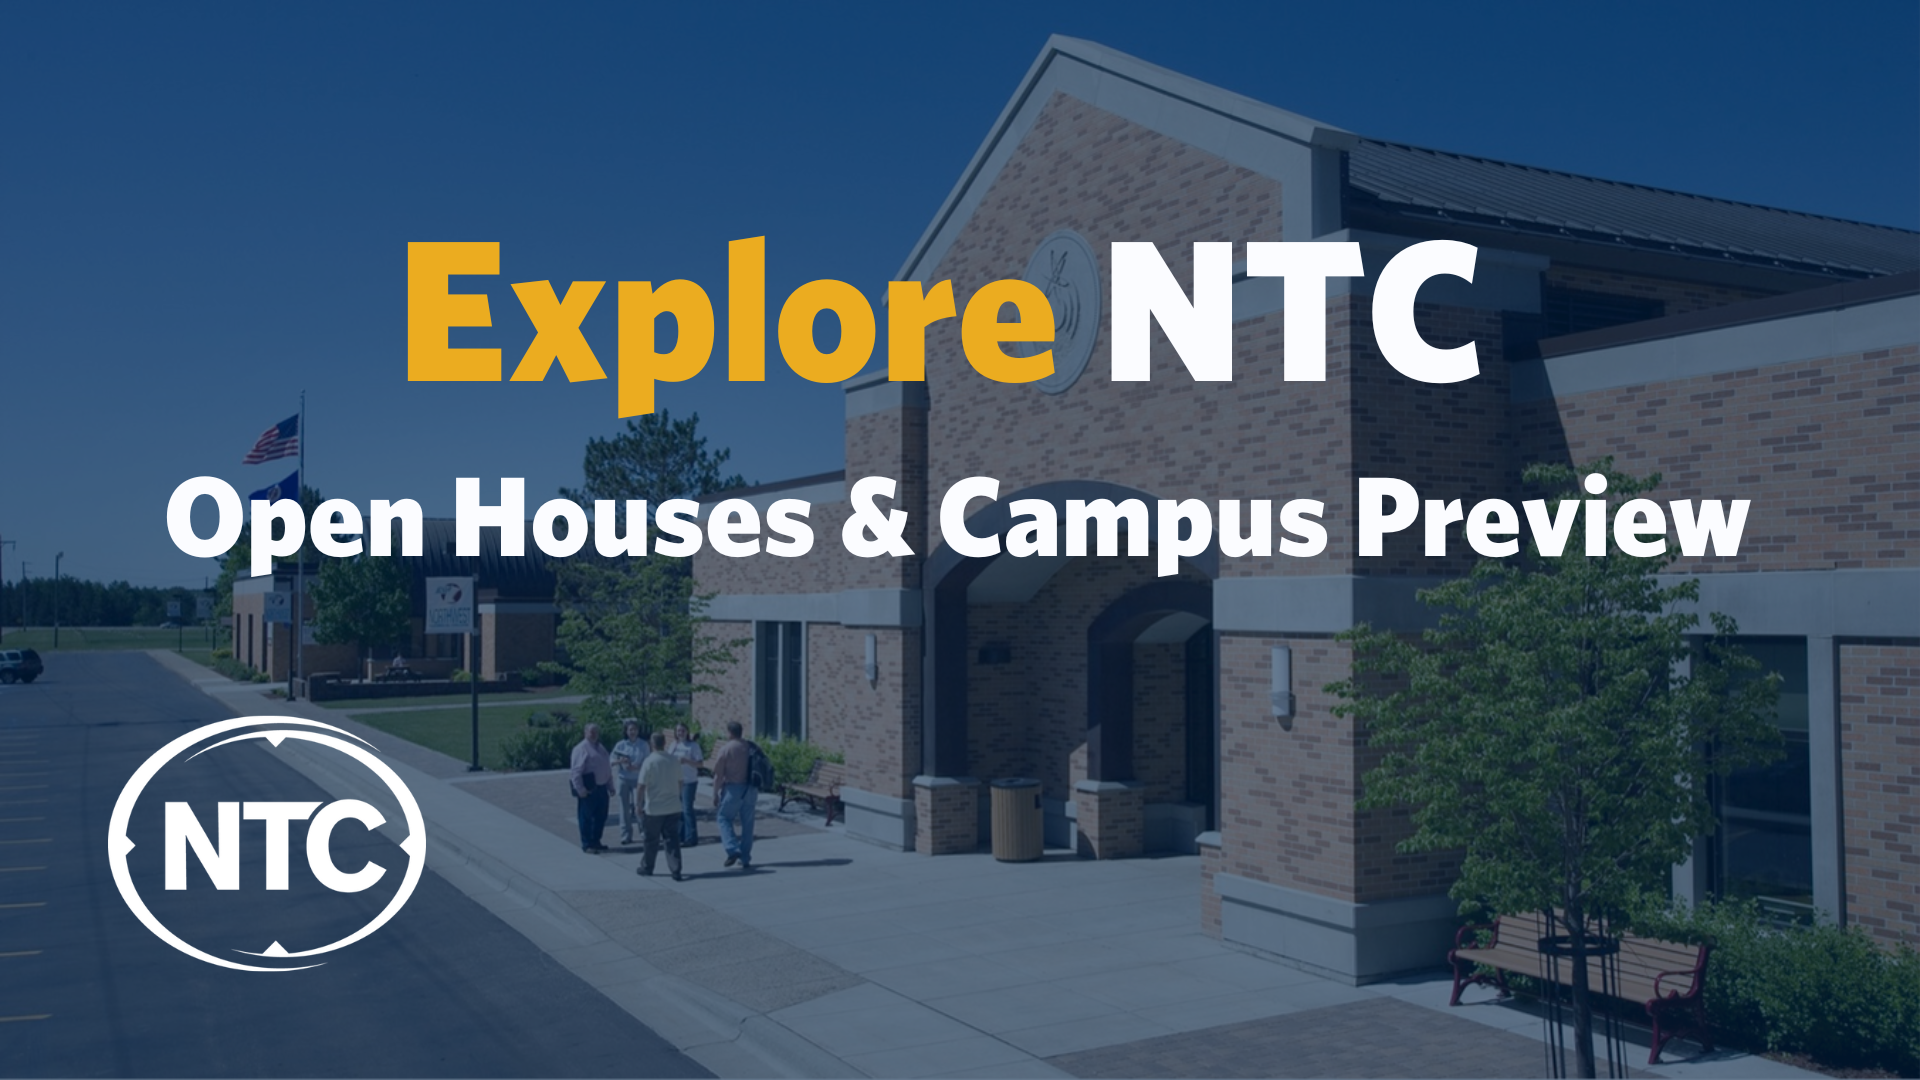 NTC will host open houses and a campus preview day in December 